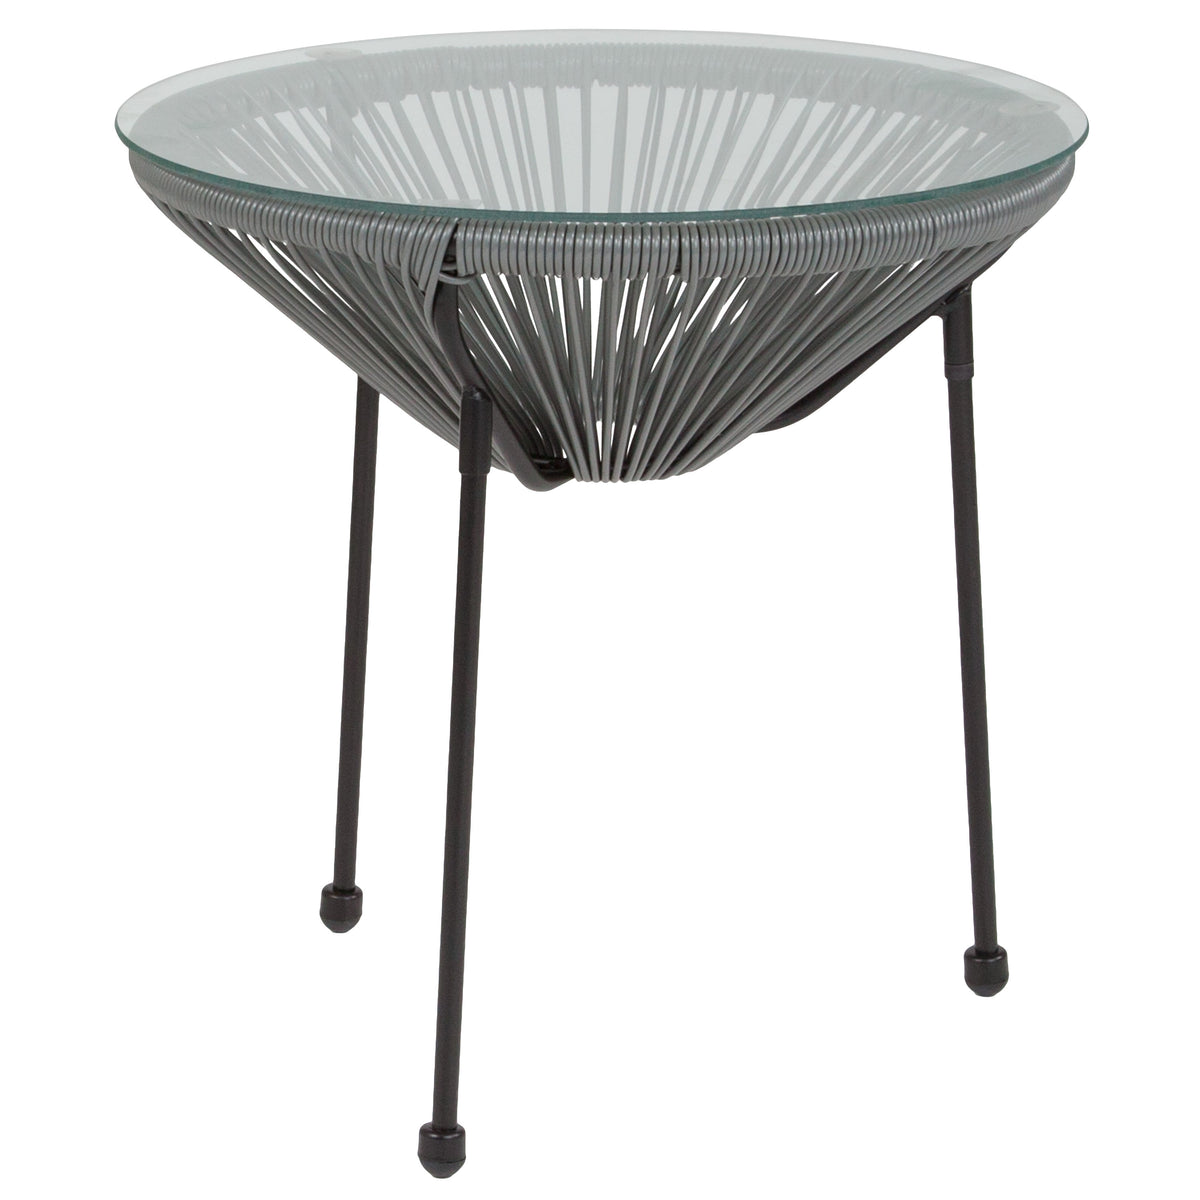 Grey |#| Grey Rattan Bungee Table with Glass Top - Living Room Furniture